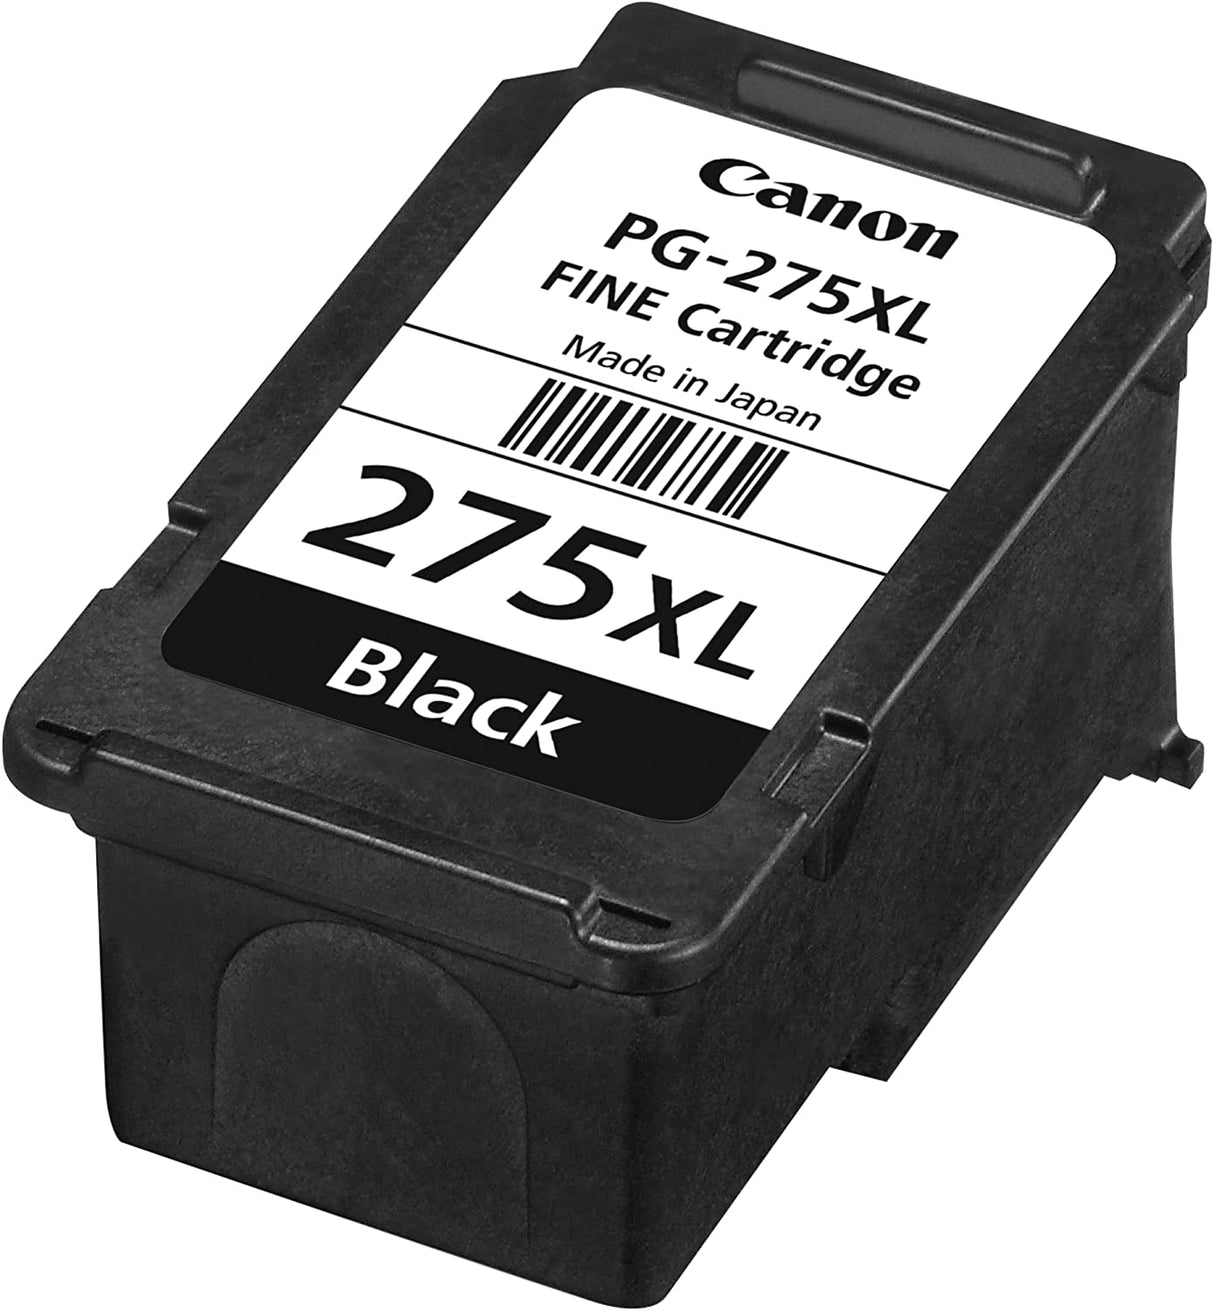 Canon® PG-275XL High-Yield Pigment Black Ink Cartridge, 4981C001 AMR